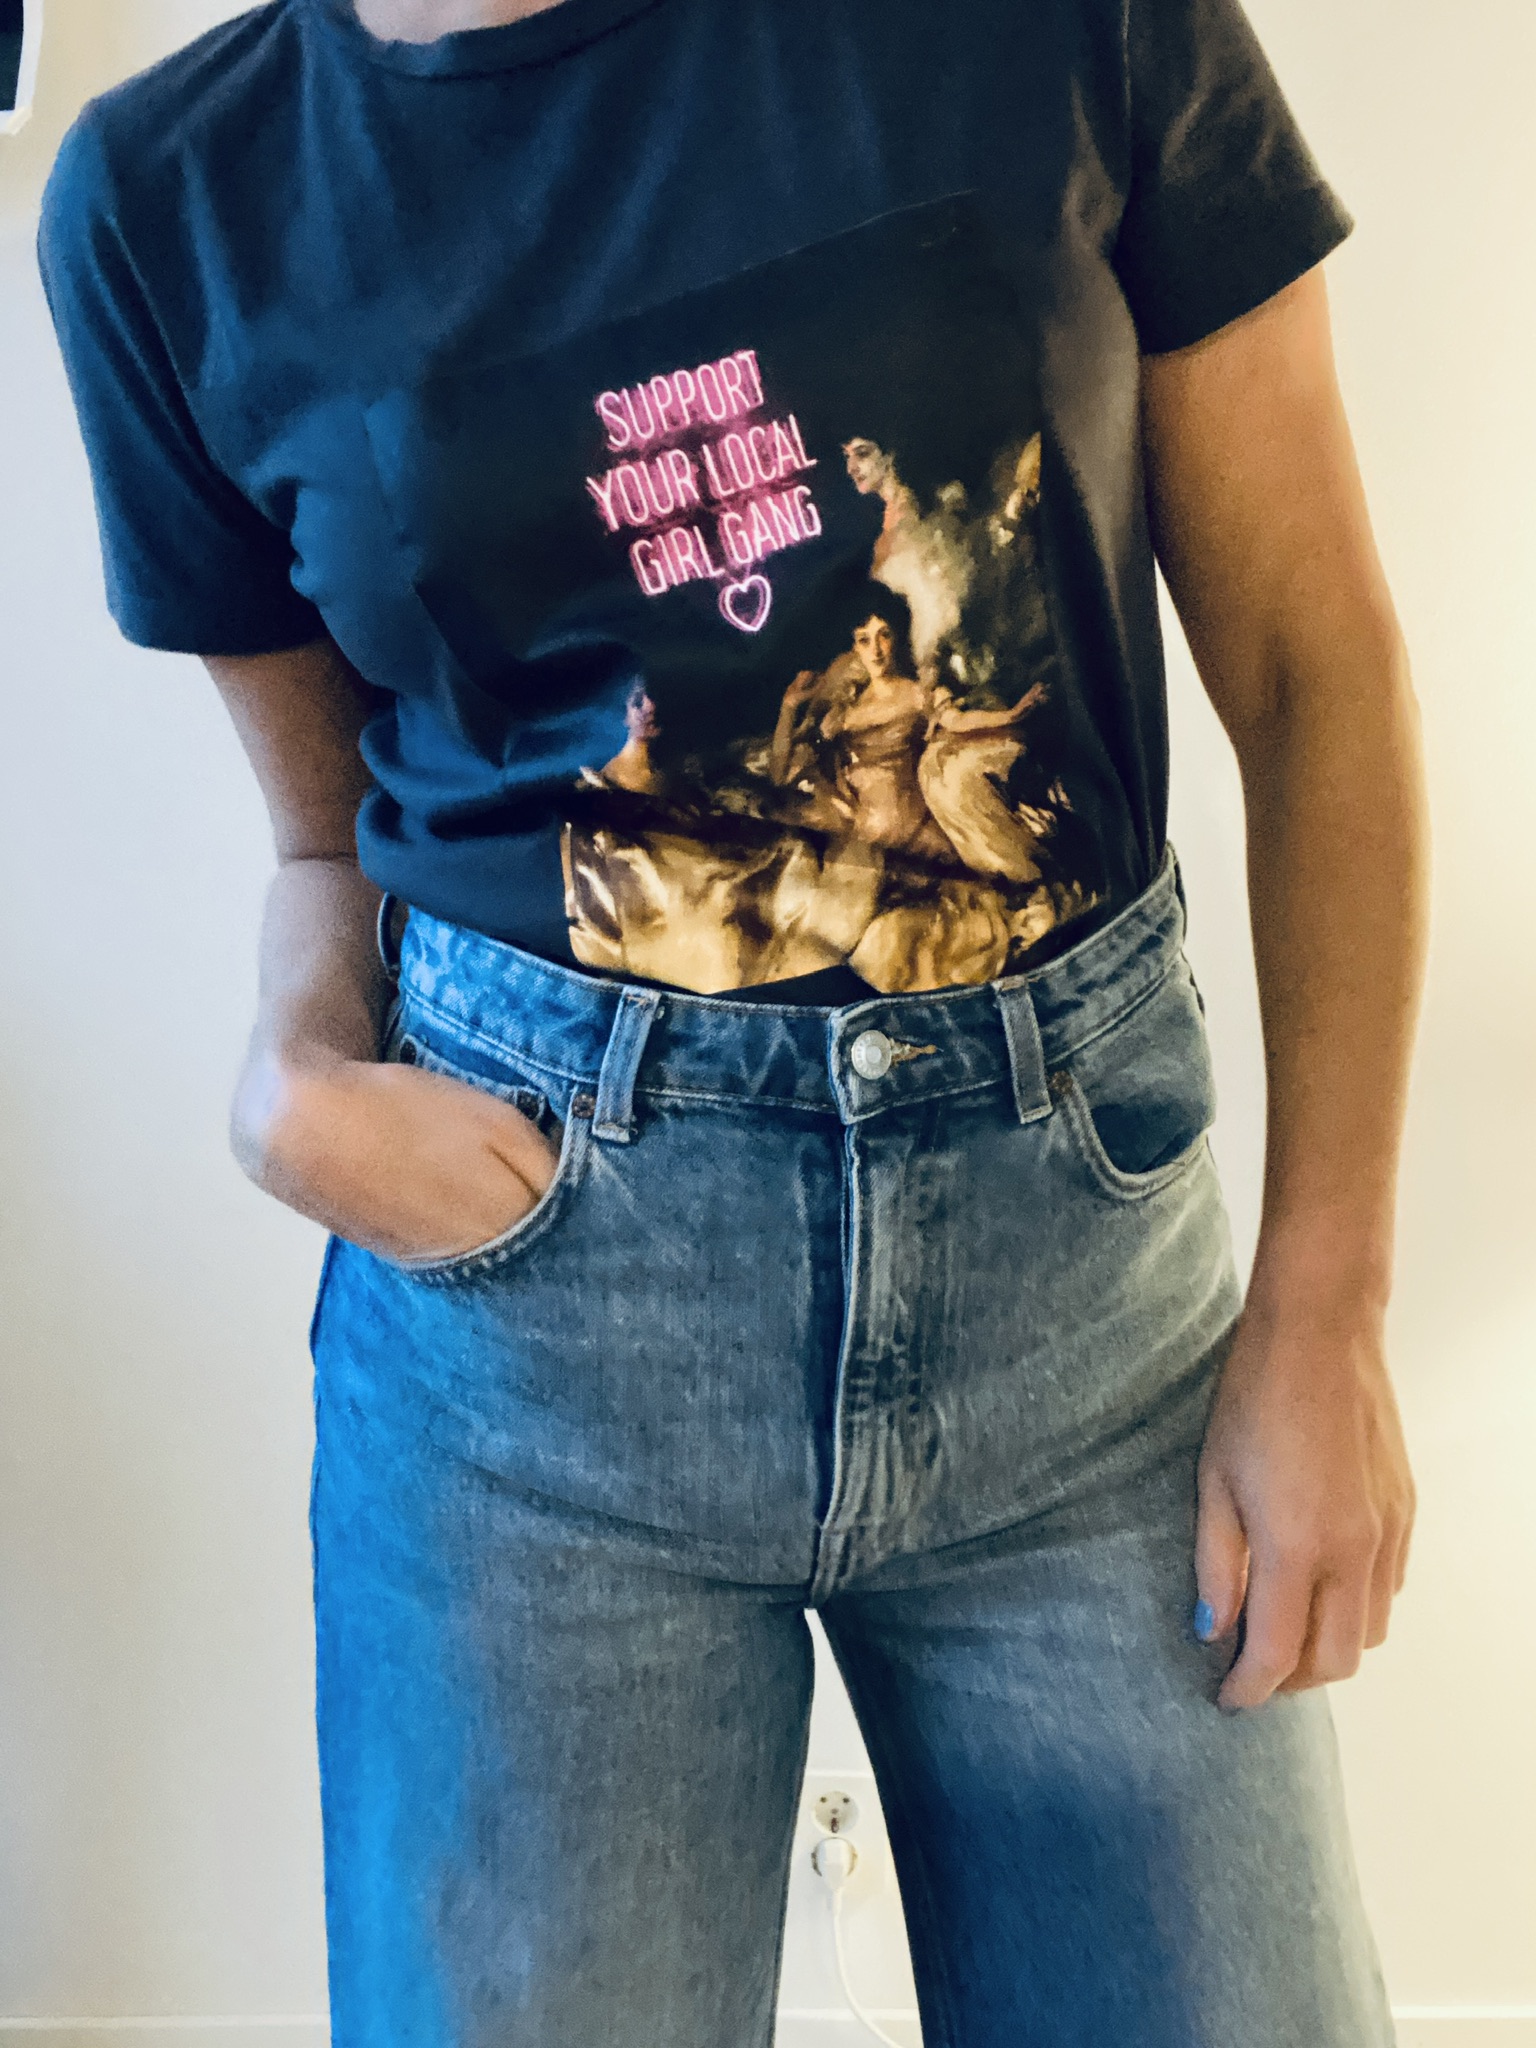 T-shirt: Support Your Local Girl Gang